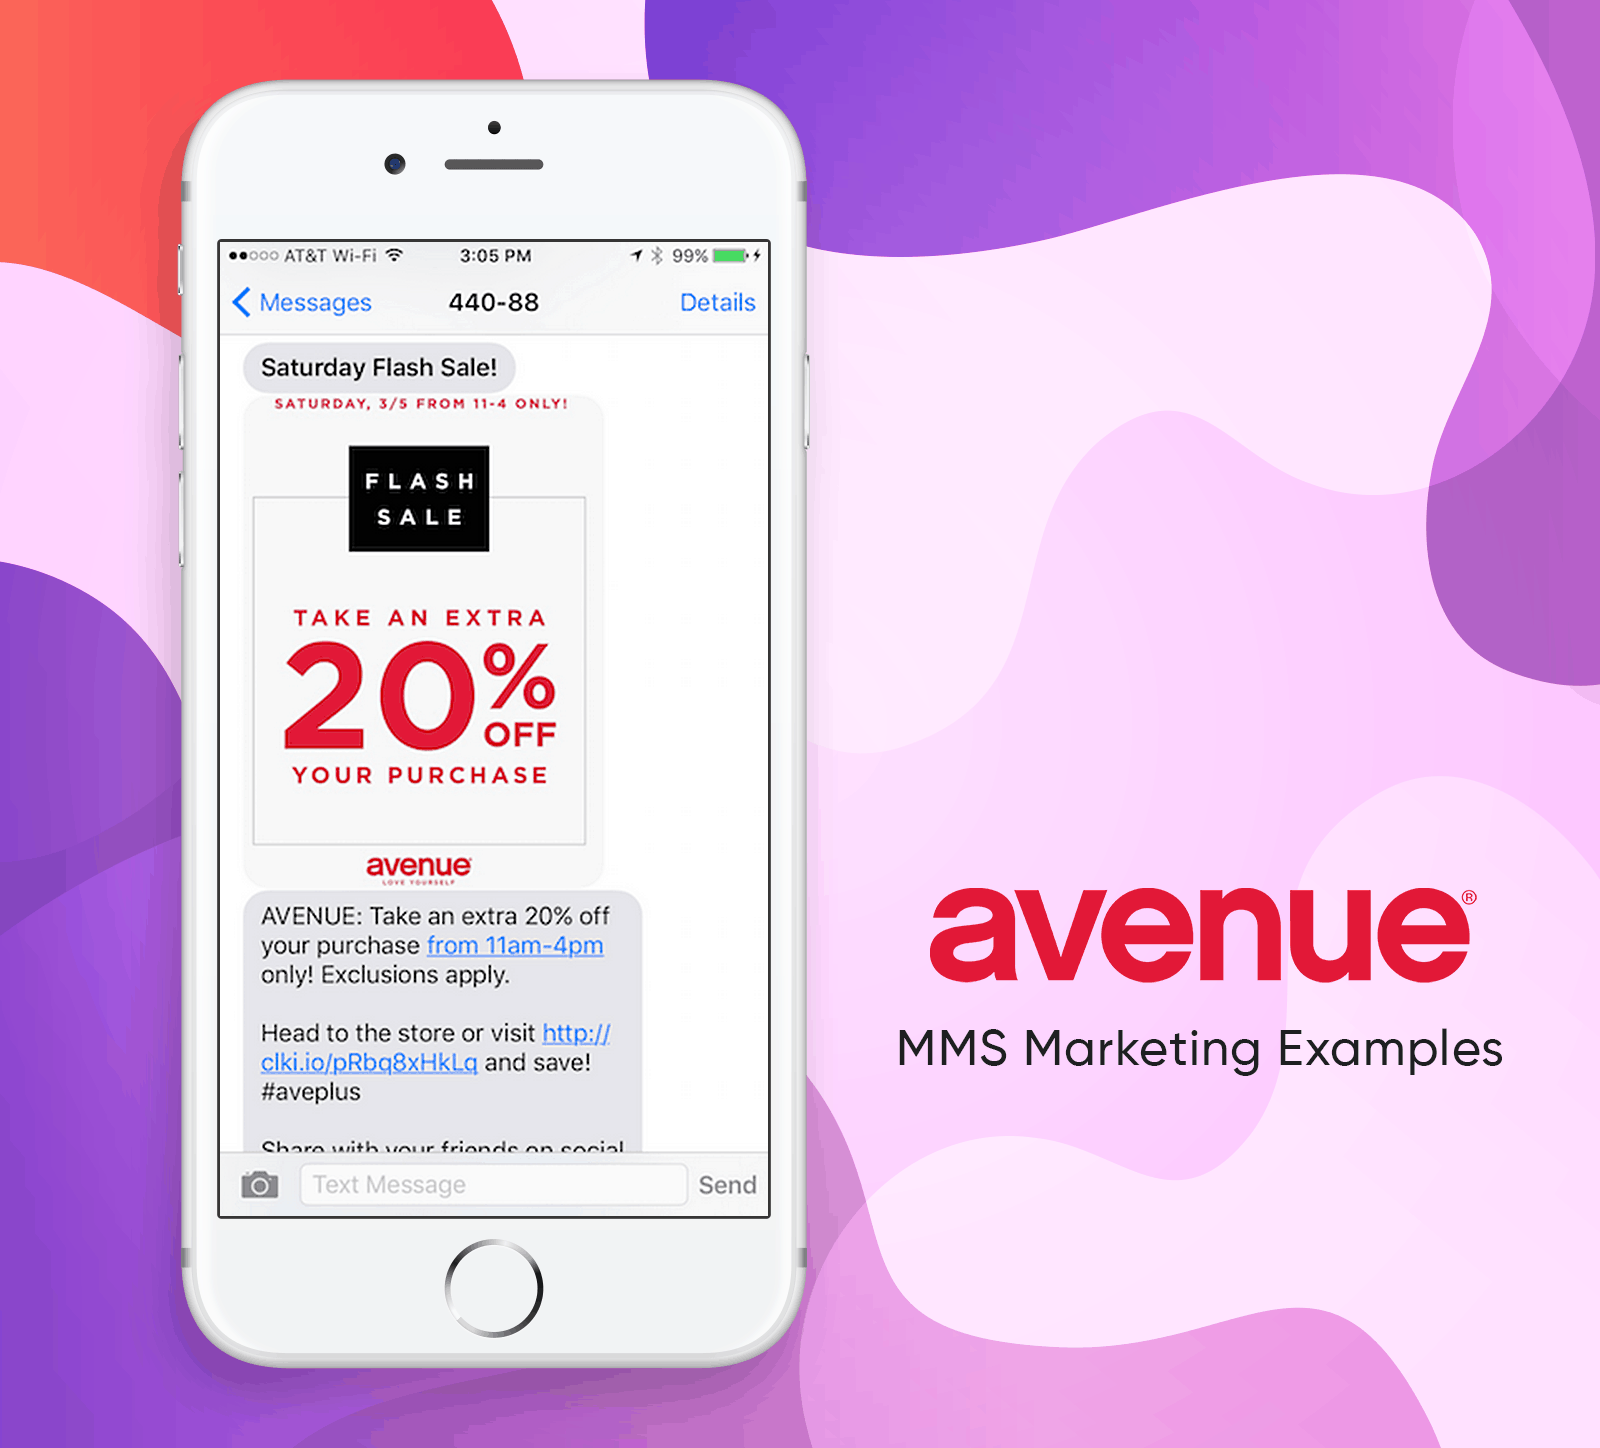 MMS Marketing Examples From Avenue Retail Stores - Saturday Flash Sale